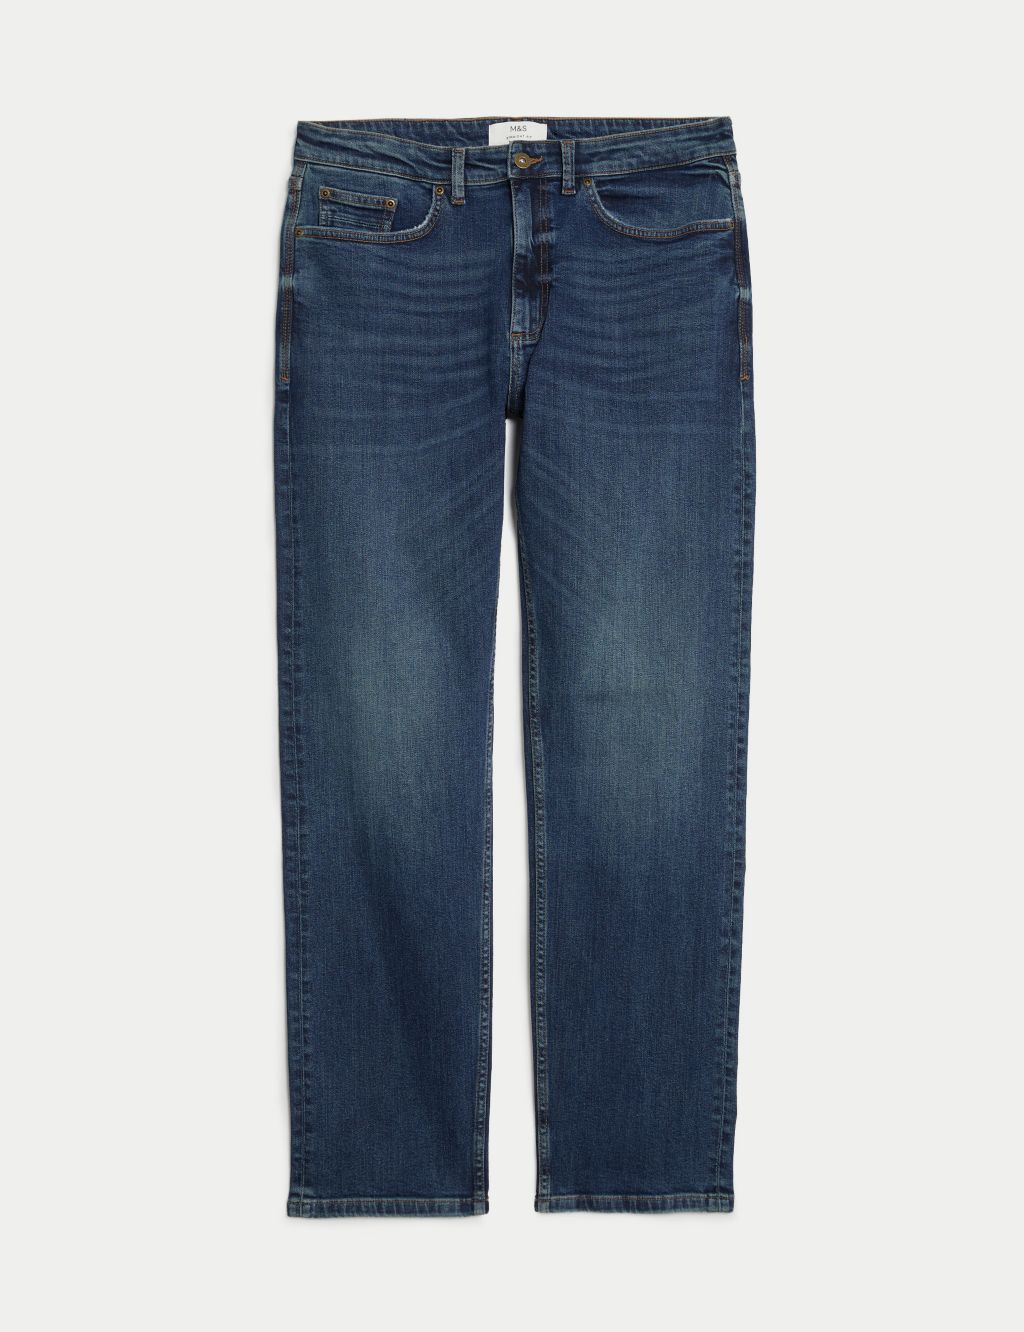 Straight Fit Vintage Wash Stretch Jeans image 2